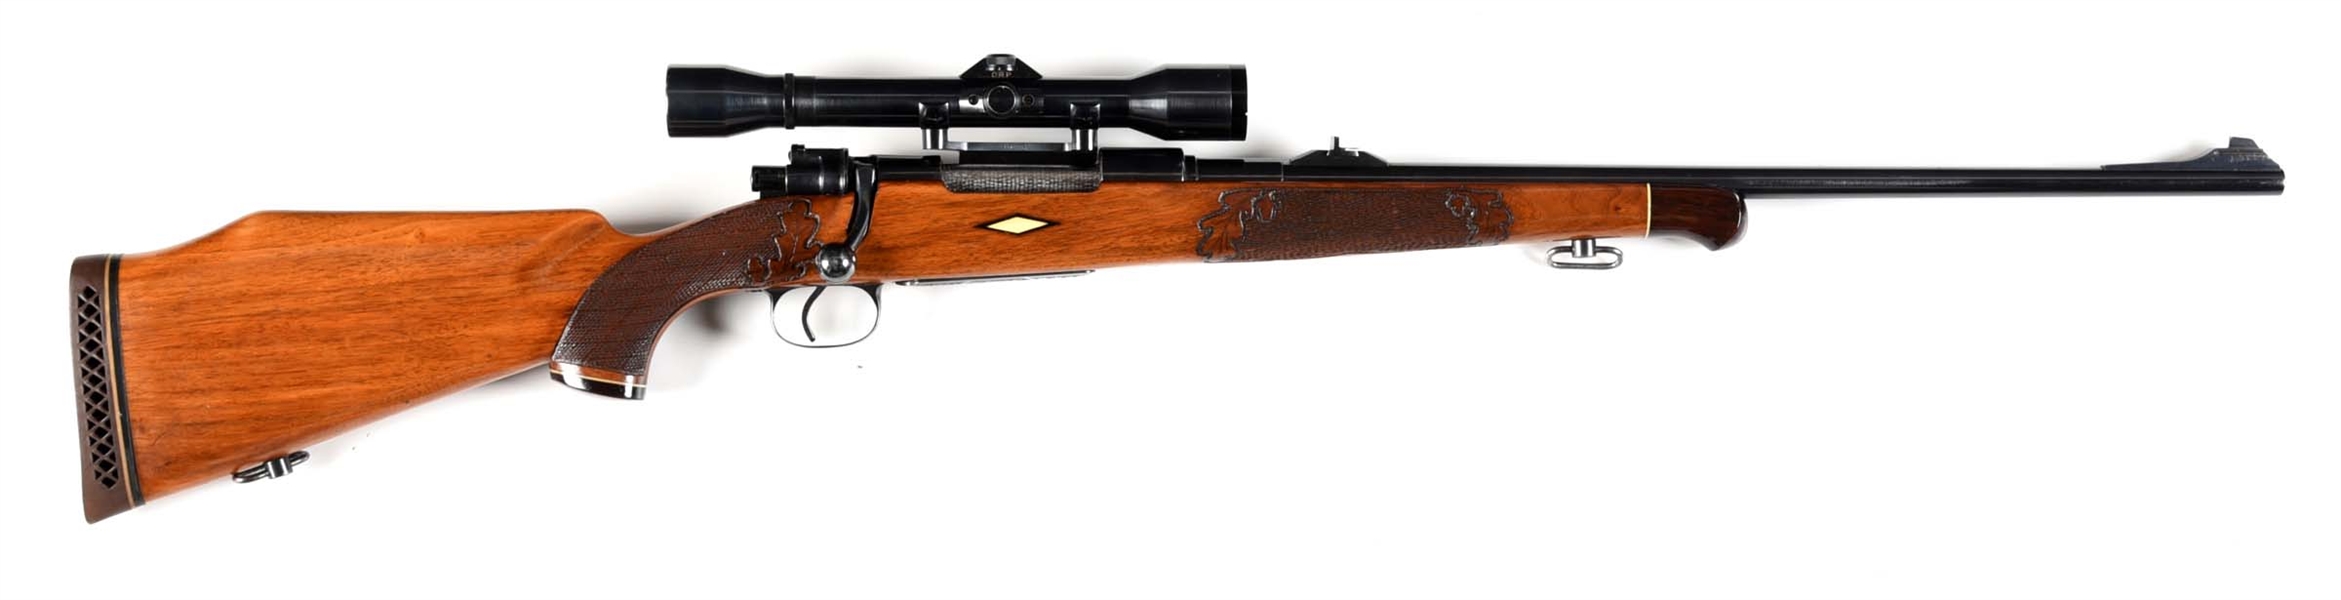 (C) ORNATE MAUSER ACTION SPORTING RIFLE.